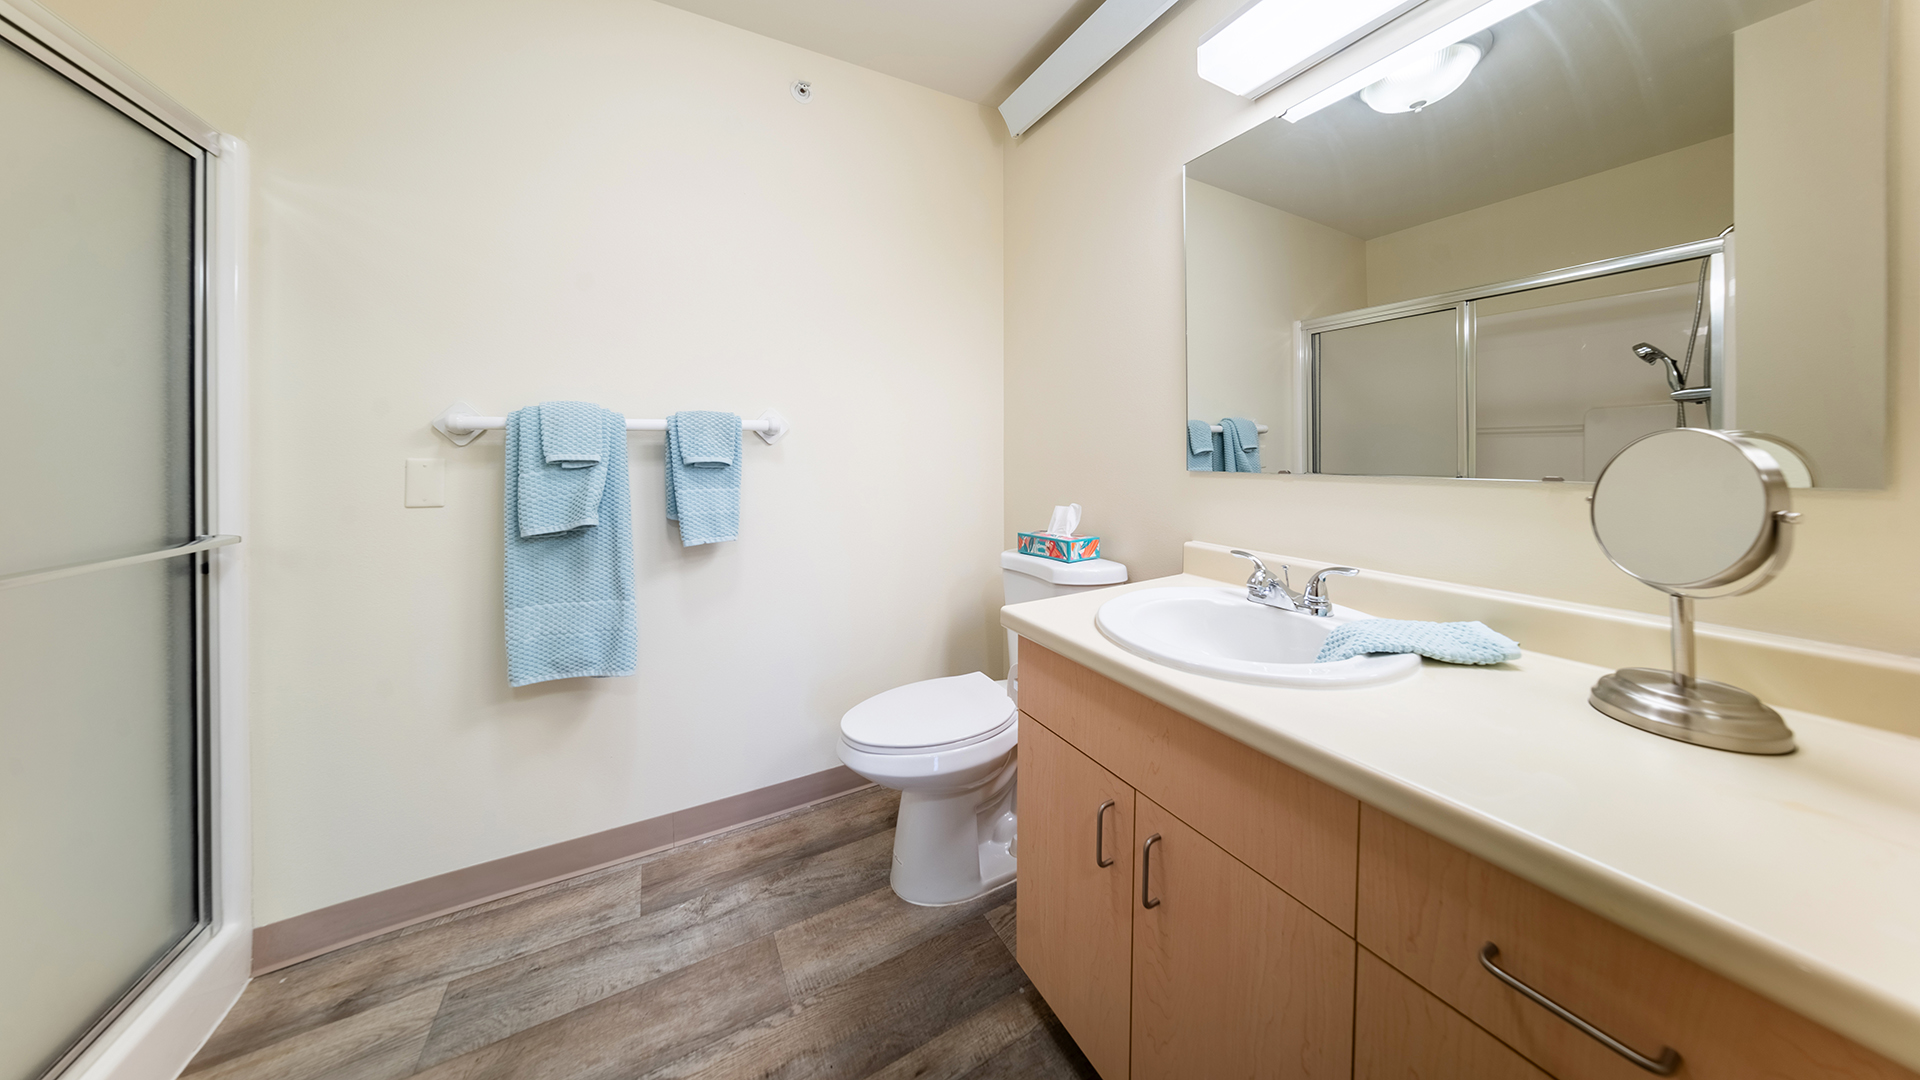 Bathroom with light blue washcloths and towels